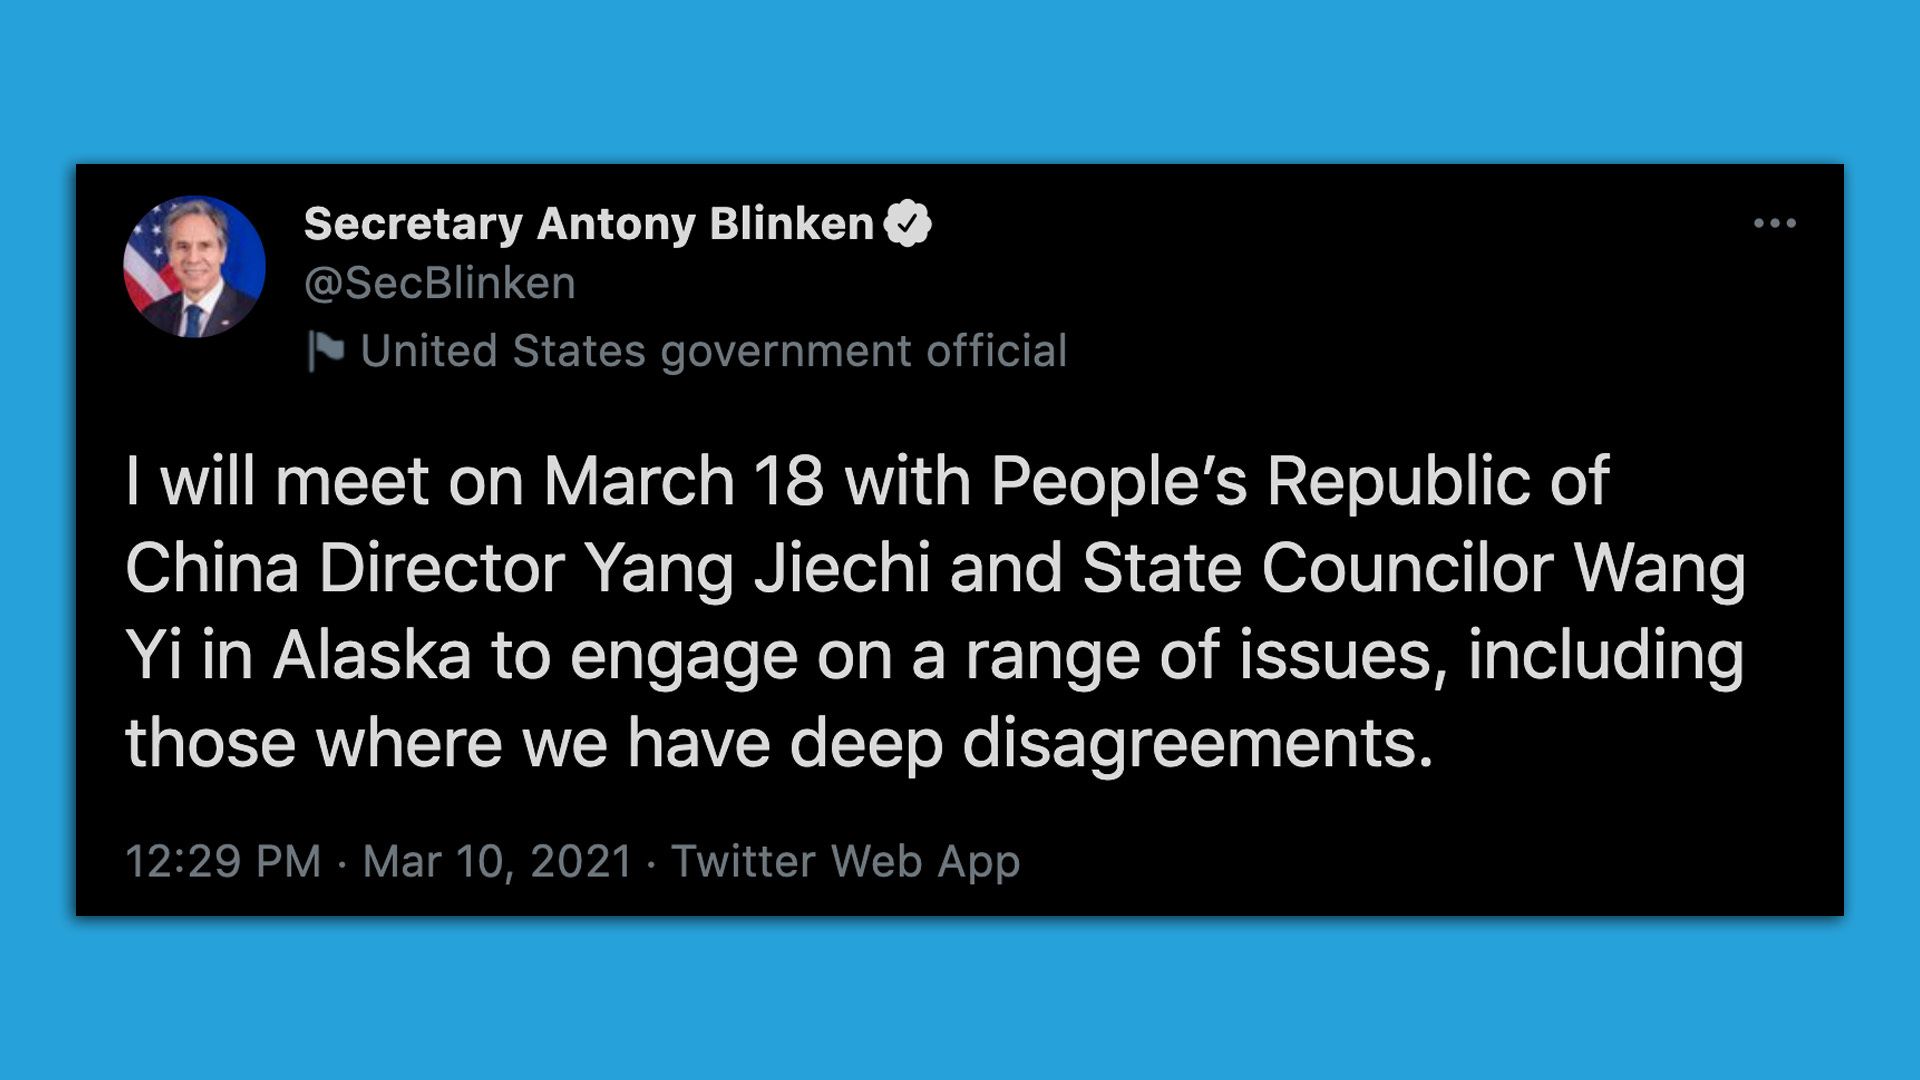 A screenshot shows a tweet sent by Secretary of State Tony Blinken about an upcoming meeting with China officials.